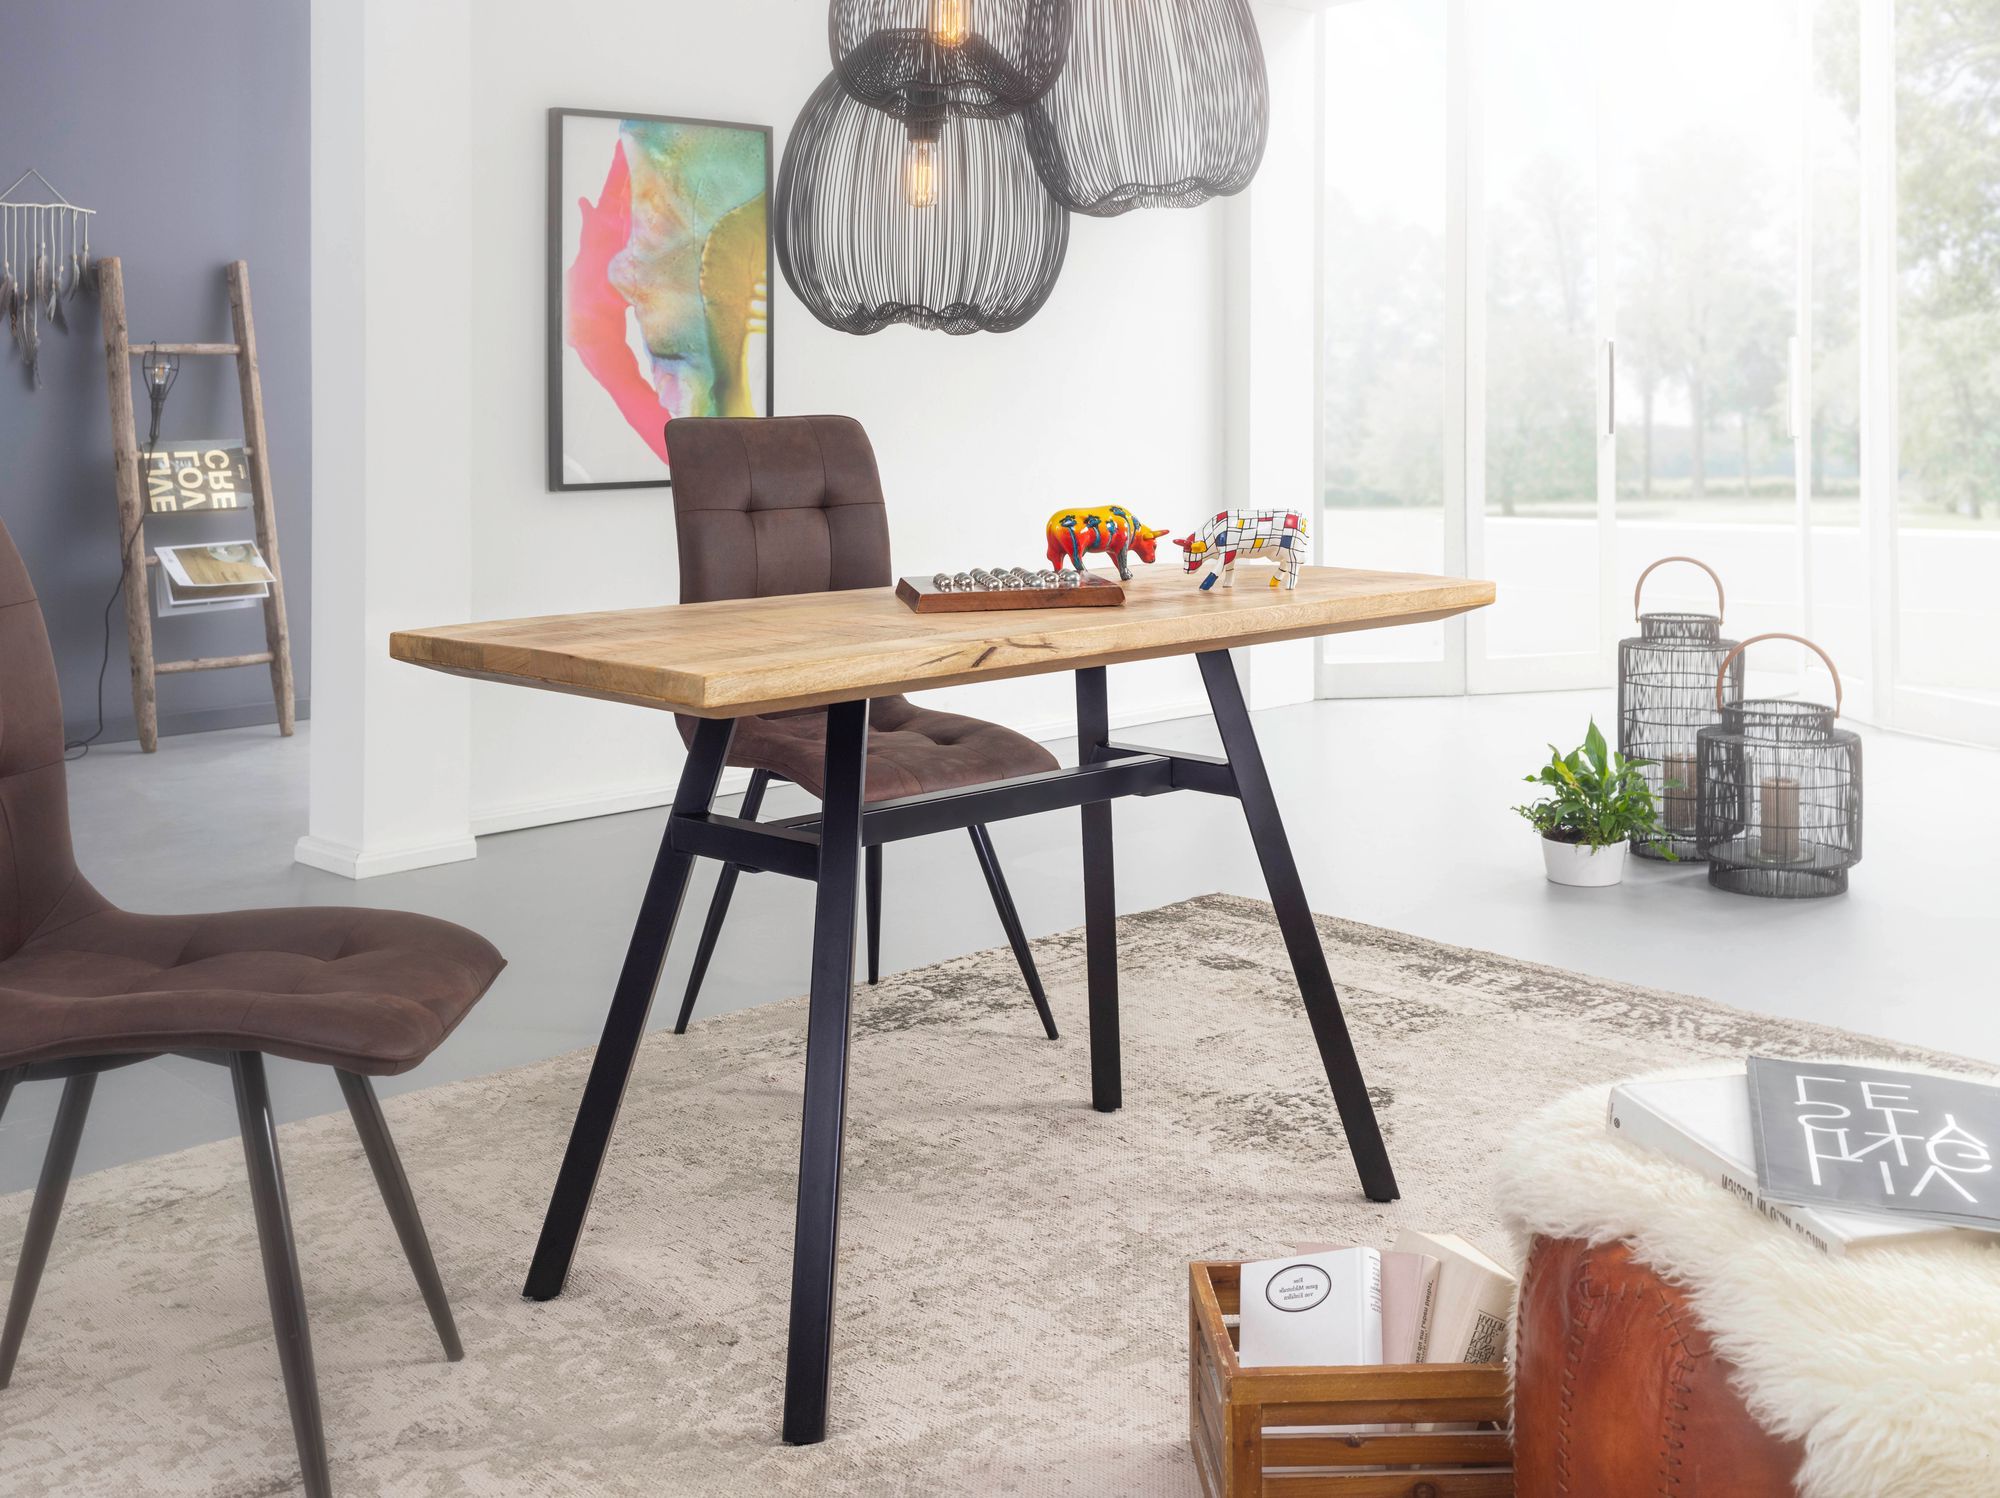 2019 Alfie Mango Solid Wood Dining Tables Inside Dining Table Mango Solid Wood 120x78x60 Cm Dining Table (View 1 of 20)